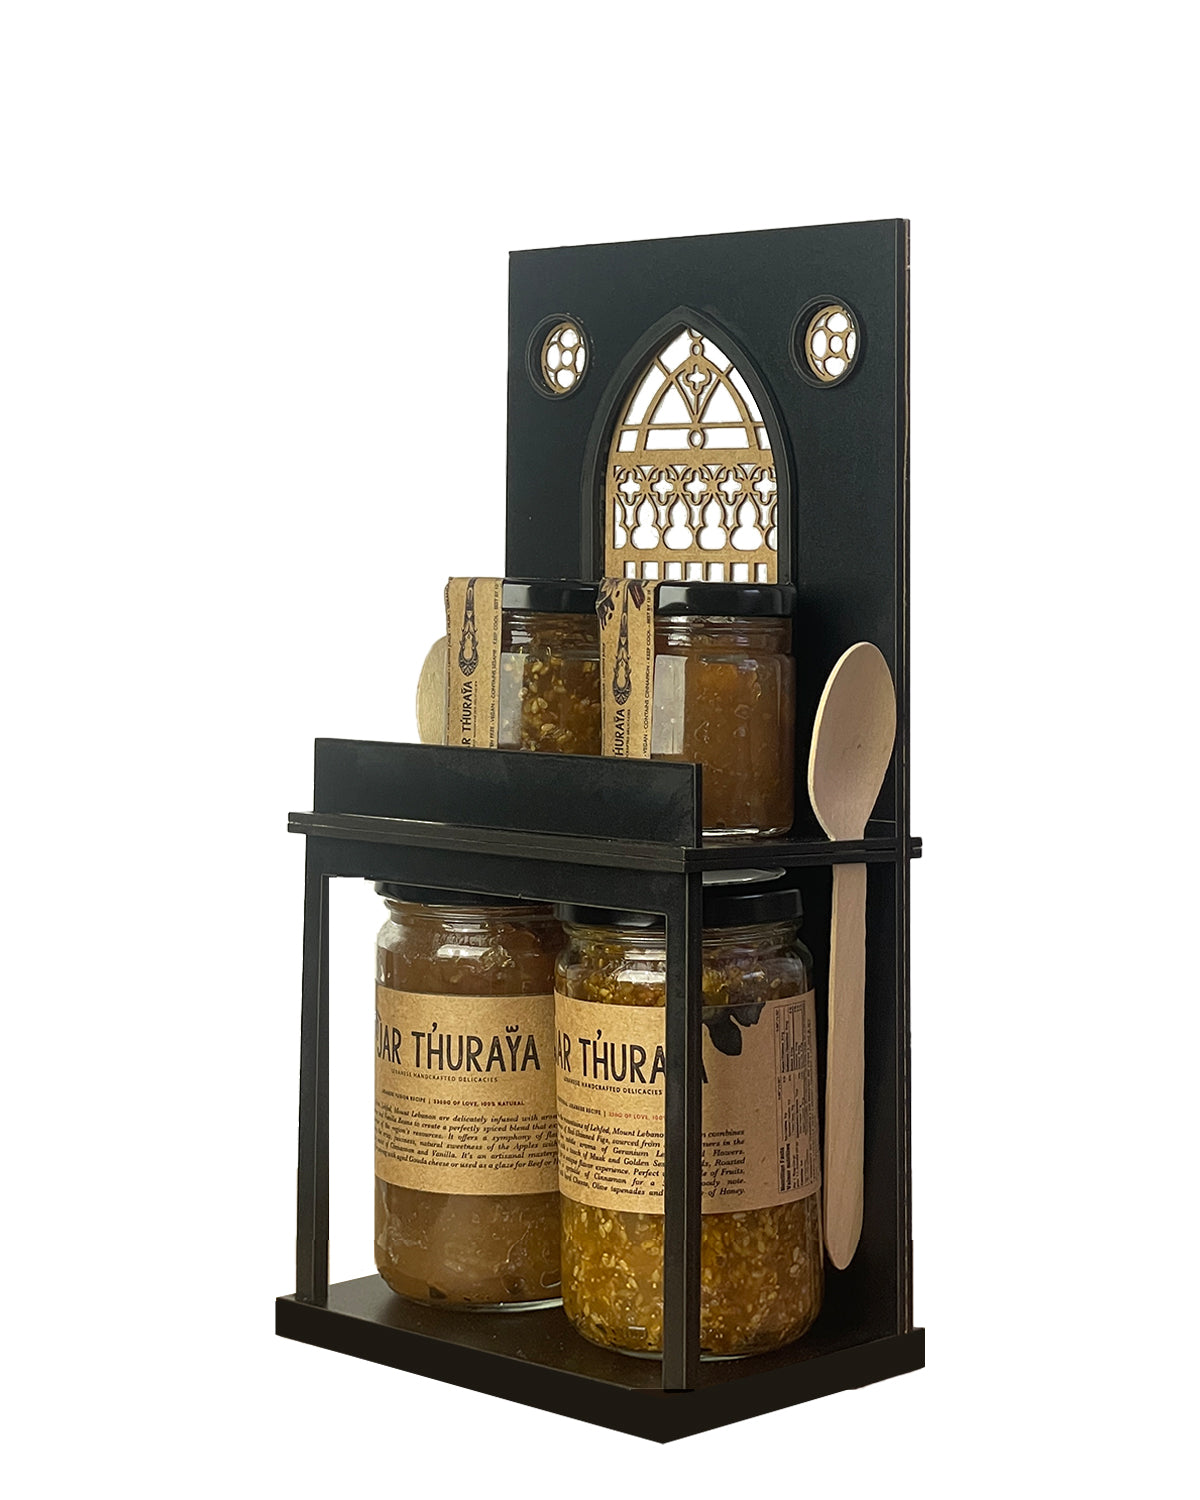 a kitchen rack for jars made with wood and representing lebanese heritage. its a DIY rack made in lebanon